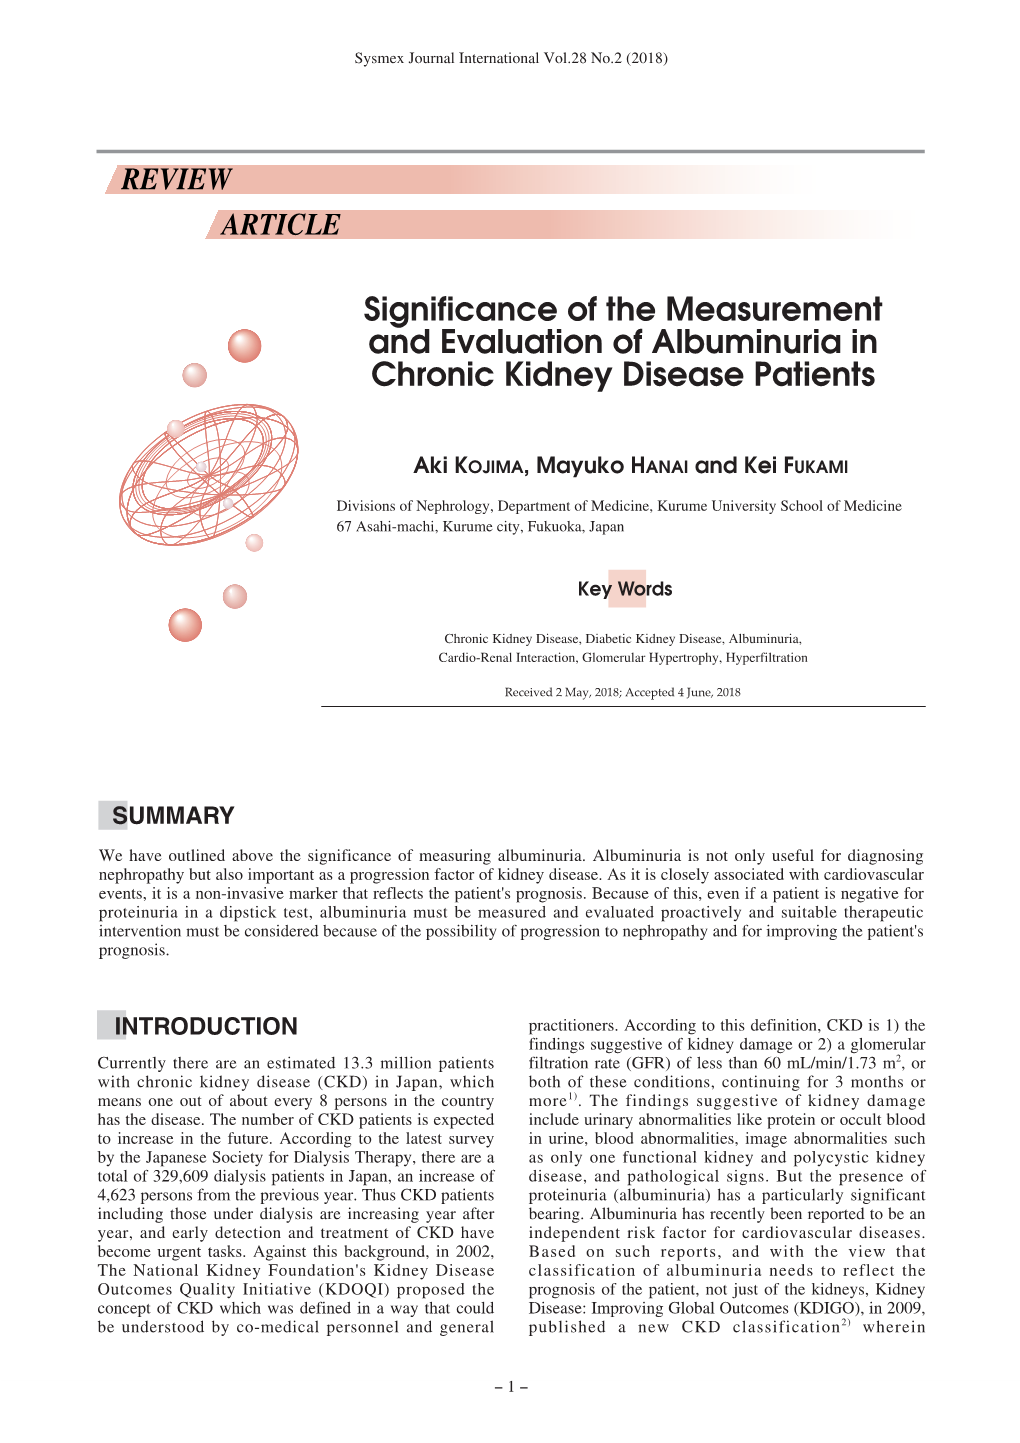 Significance of the Measurement and Evaluation of Albuminuria in Chronic Kidney Disease Patients